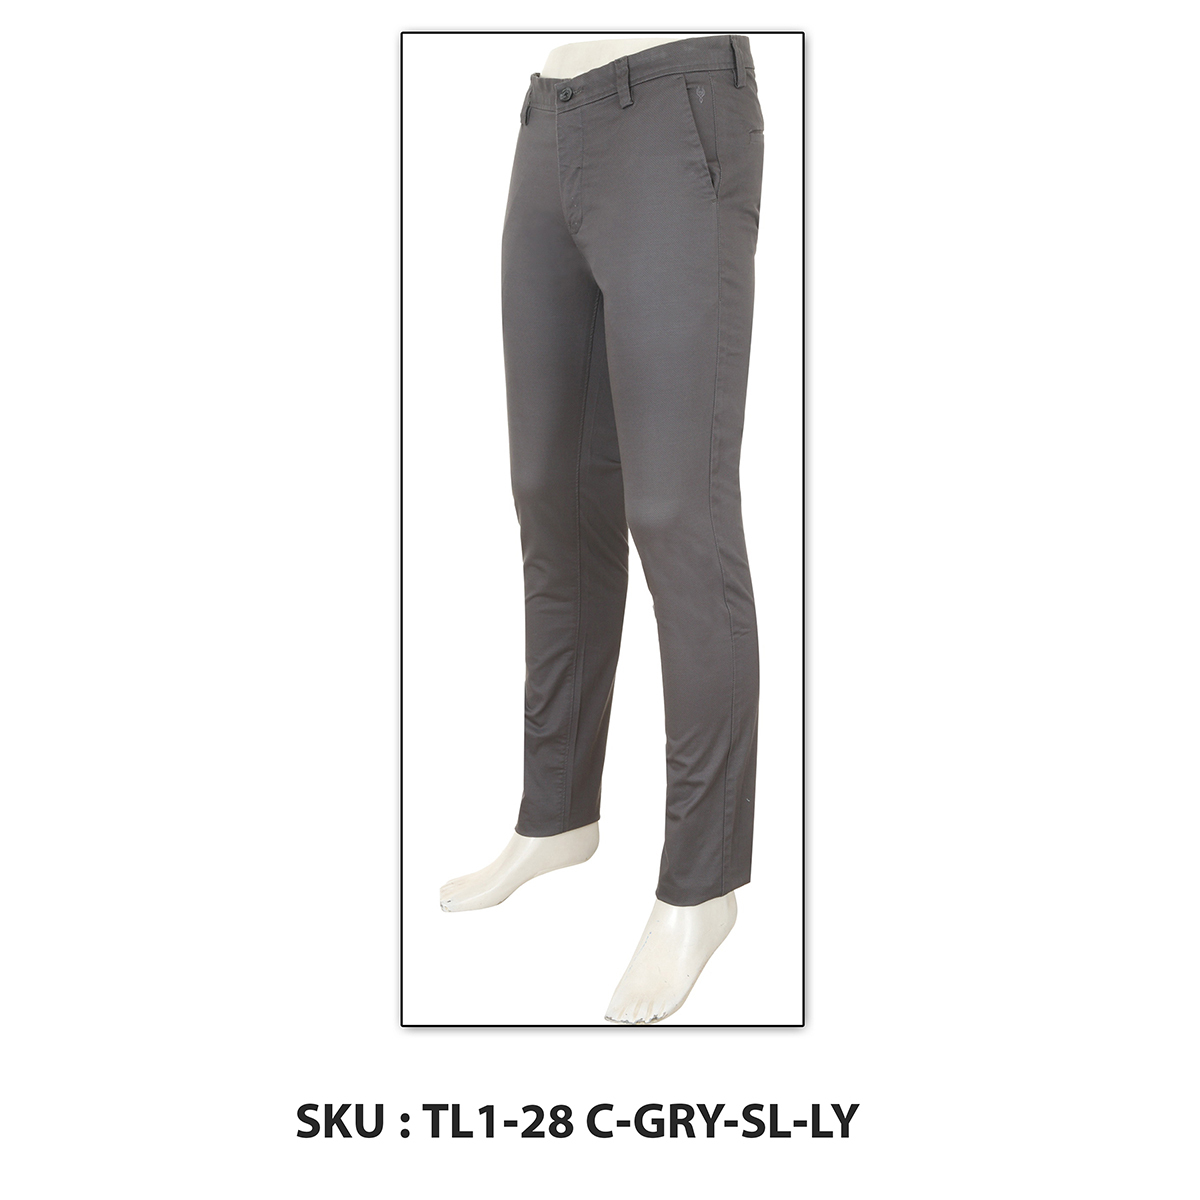 Classic Polo Mens Trousers Tl1-28 C-Gry-Sl-Ly Grey 36